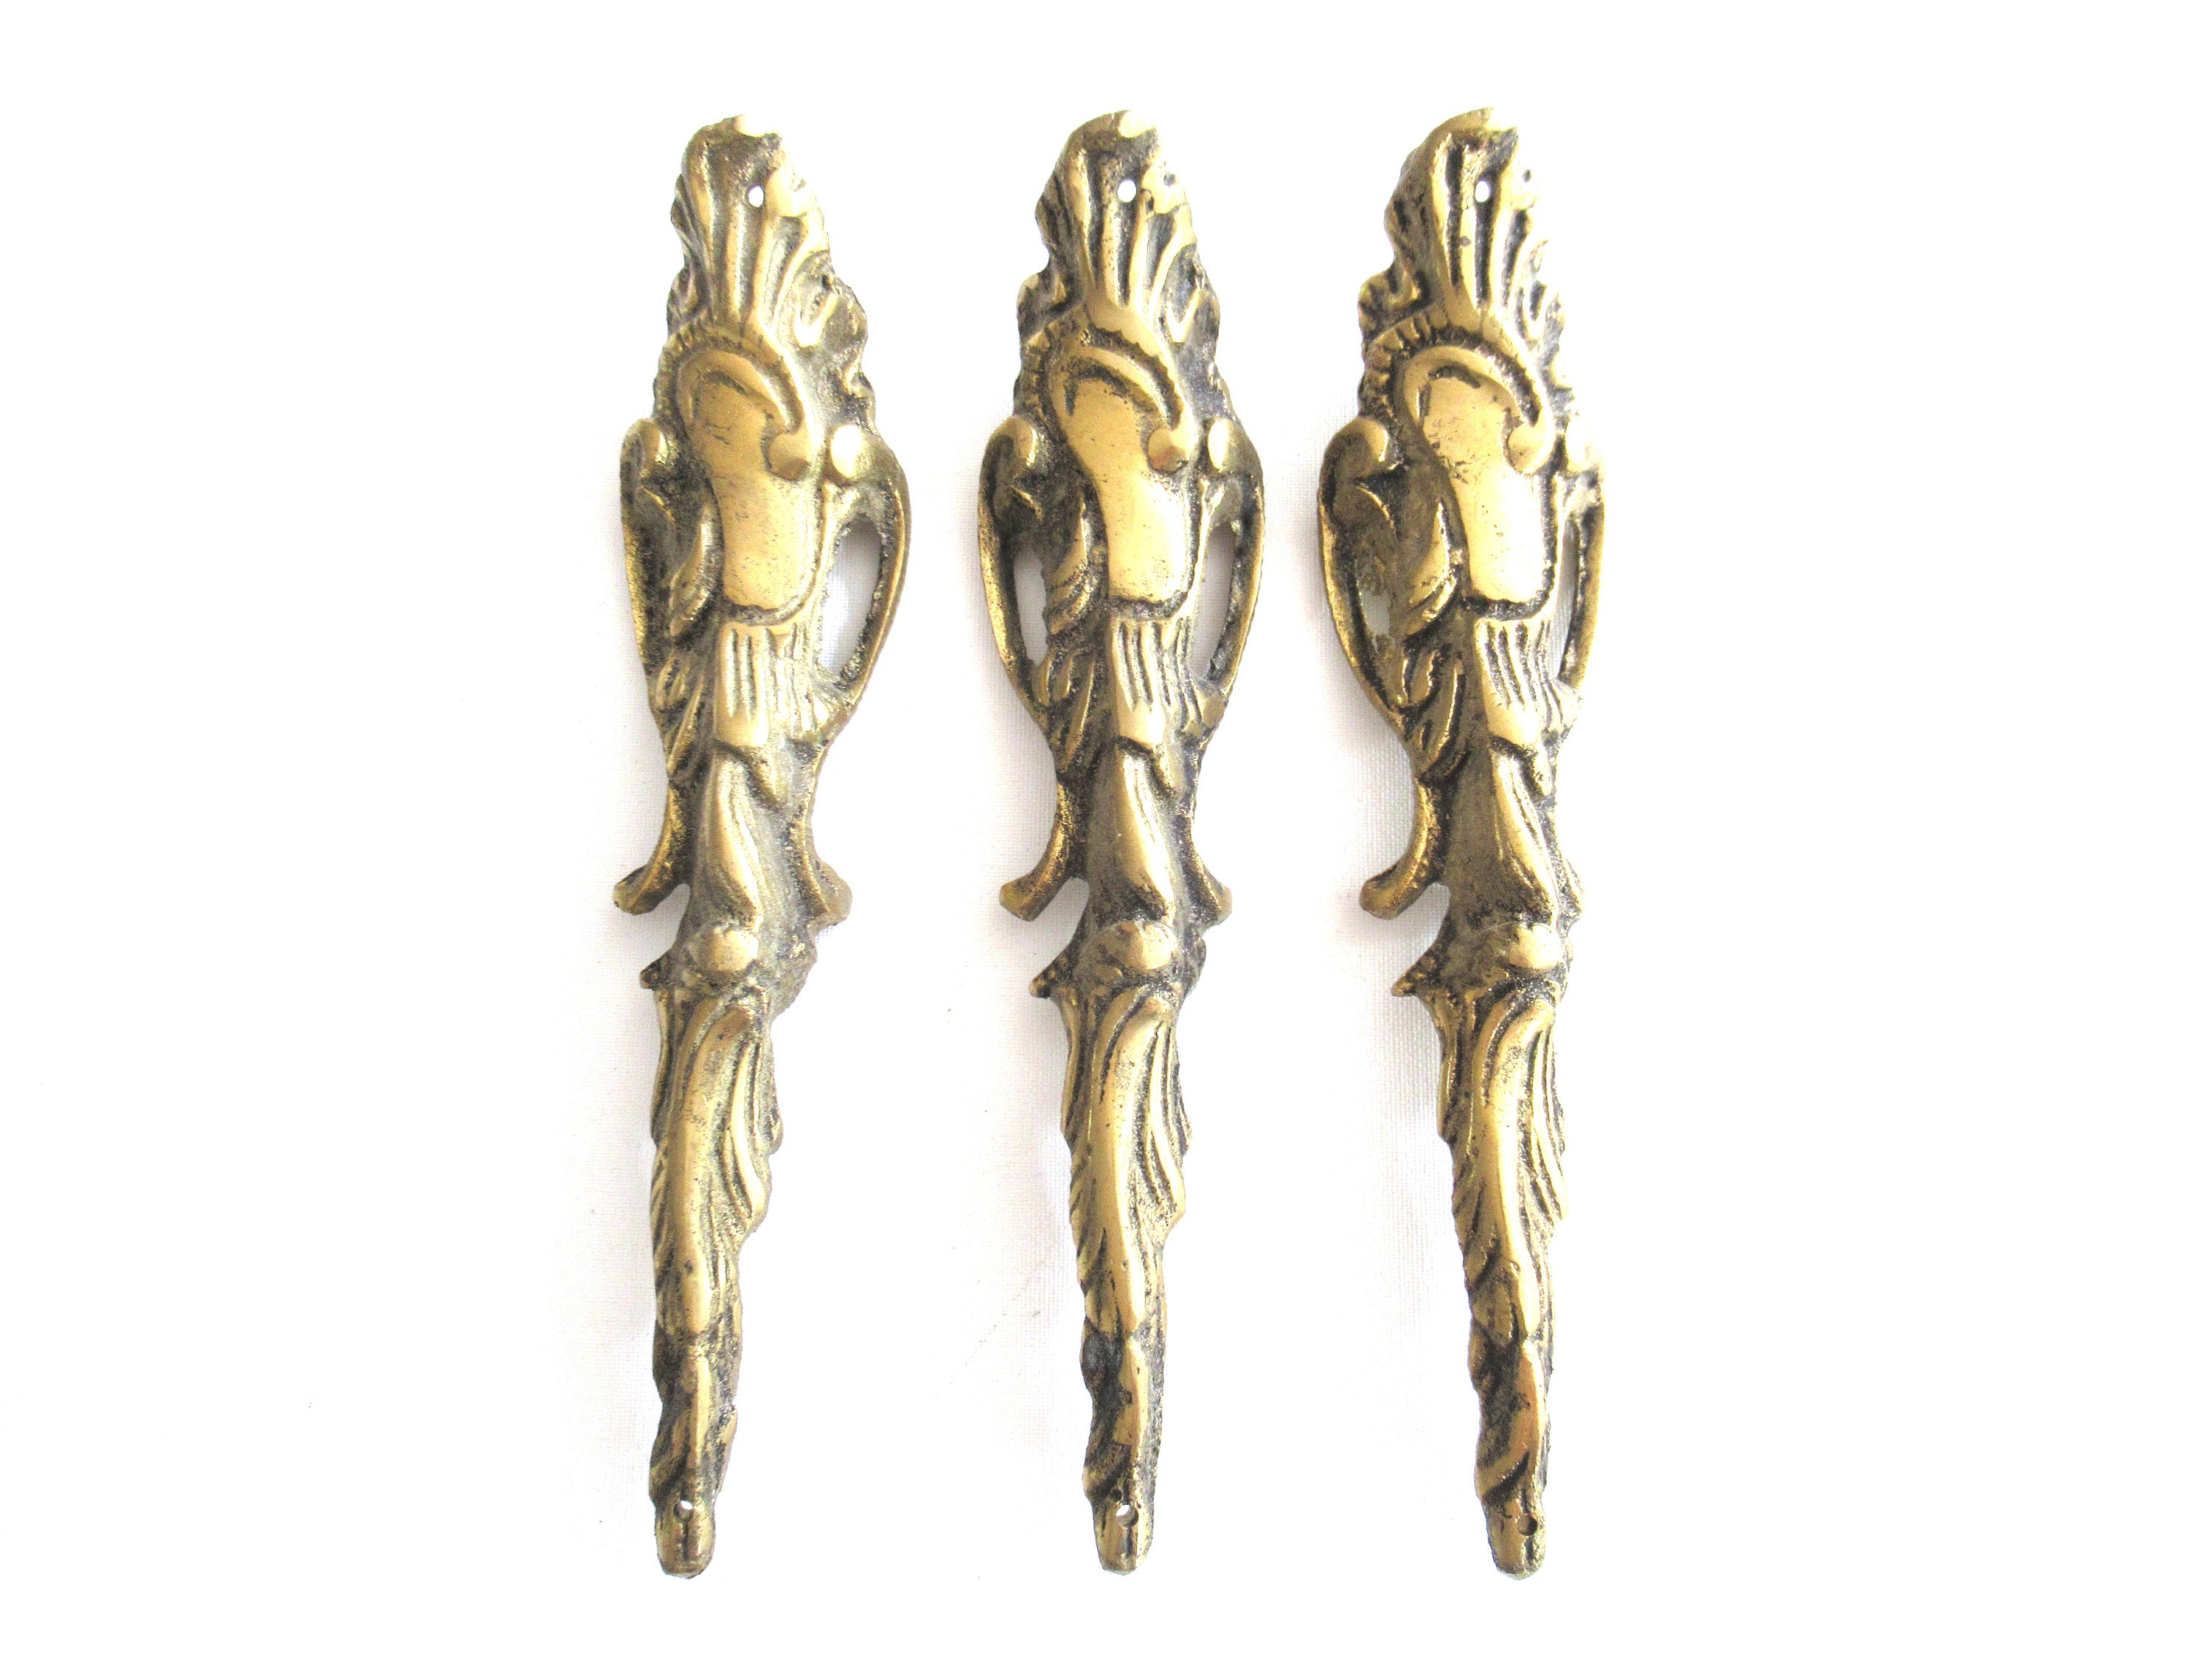 Buy A Set of 3 Antique Brass Ornaments / Corners. Authentic Antique  Hardware, Embellishment Restoration Supply. 7DAG19AK5 Online in India 